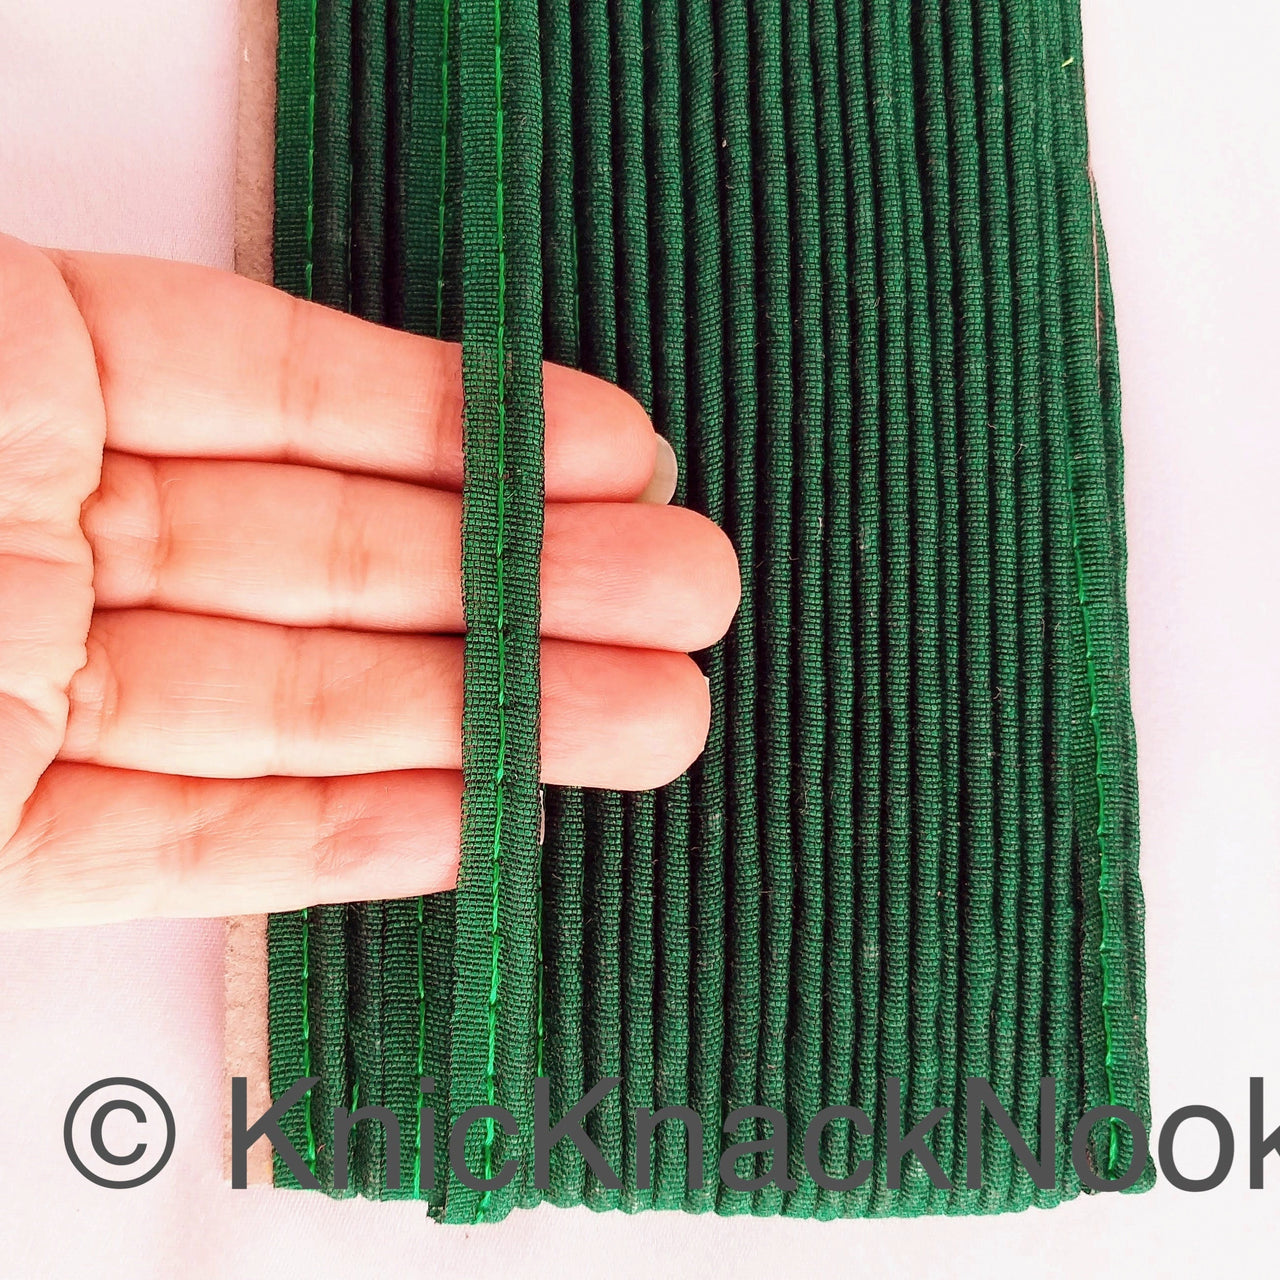 2mm Flanged Insertion Piping on 9mm Band, Green Art Silk Fabric Trim, Cord piping Trim